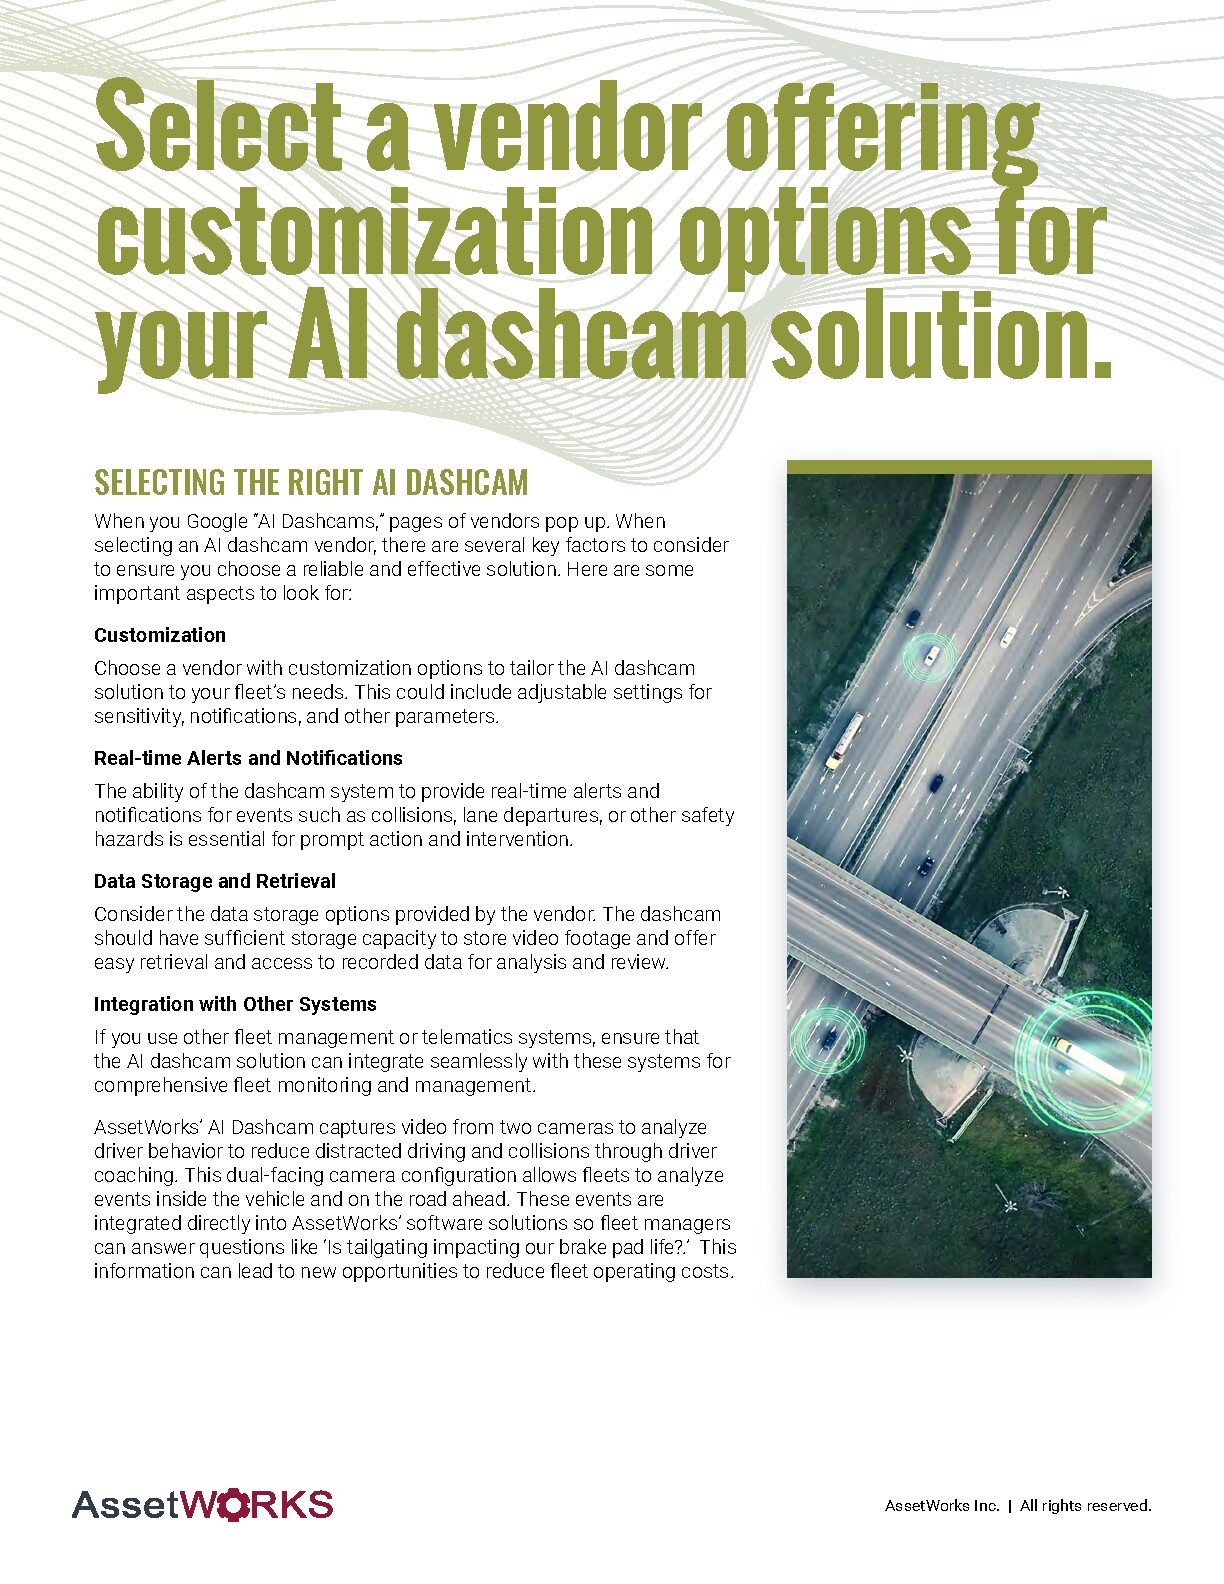 How to Use Telematics Data to Modernize Fleet Management Practices_Page_4